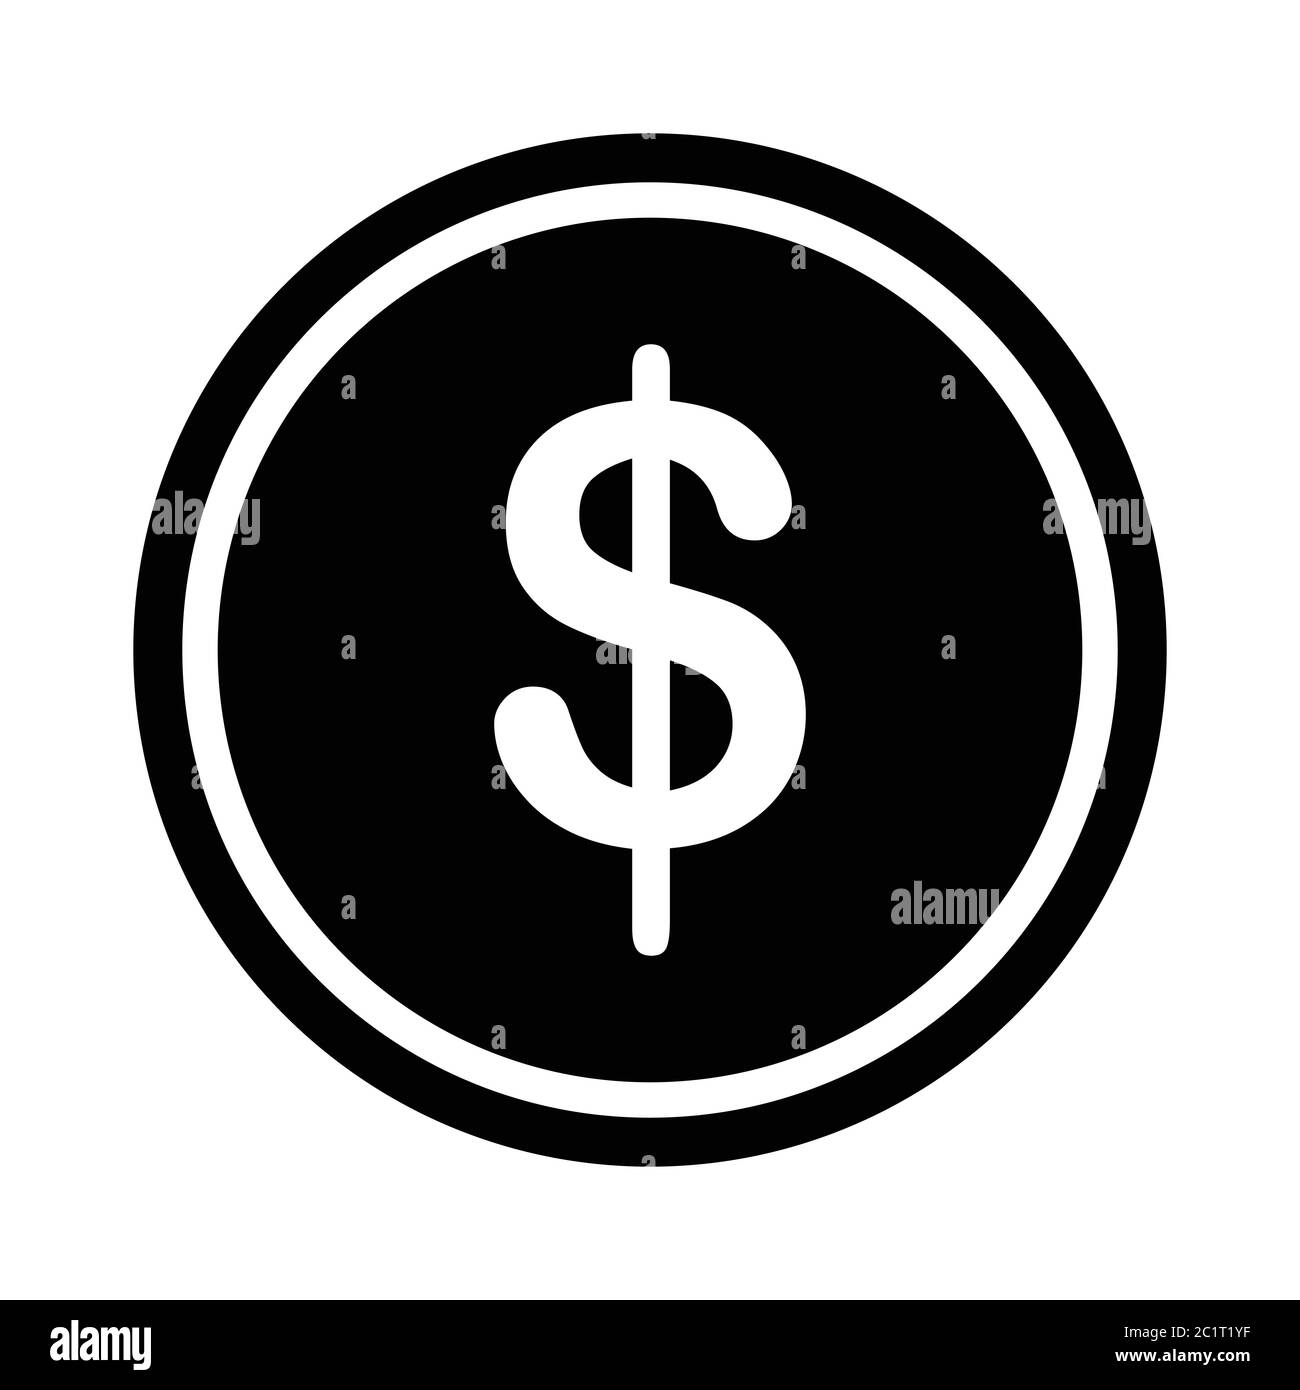 Money Coin Round Circular Dollar Sign Icon.  Black Illustration Isolated on a White Background. EPS Vector Stock Vector